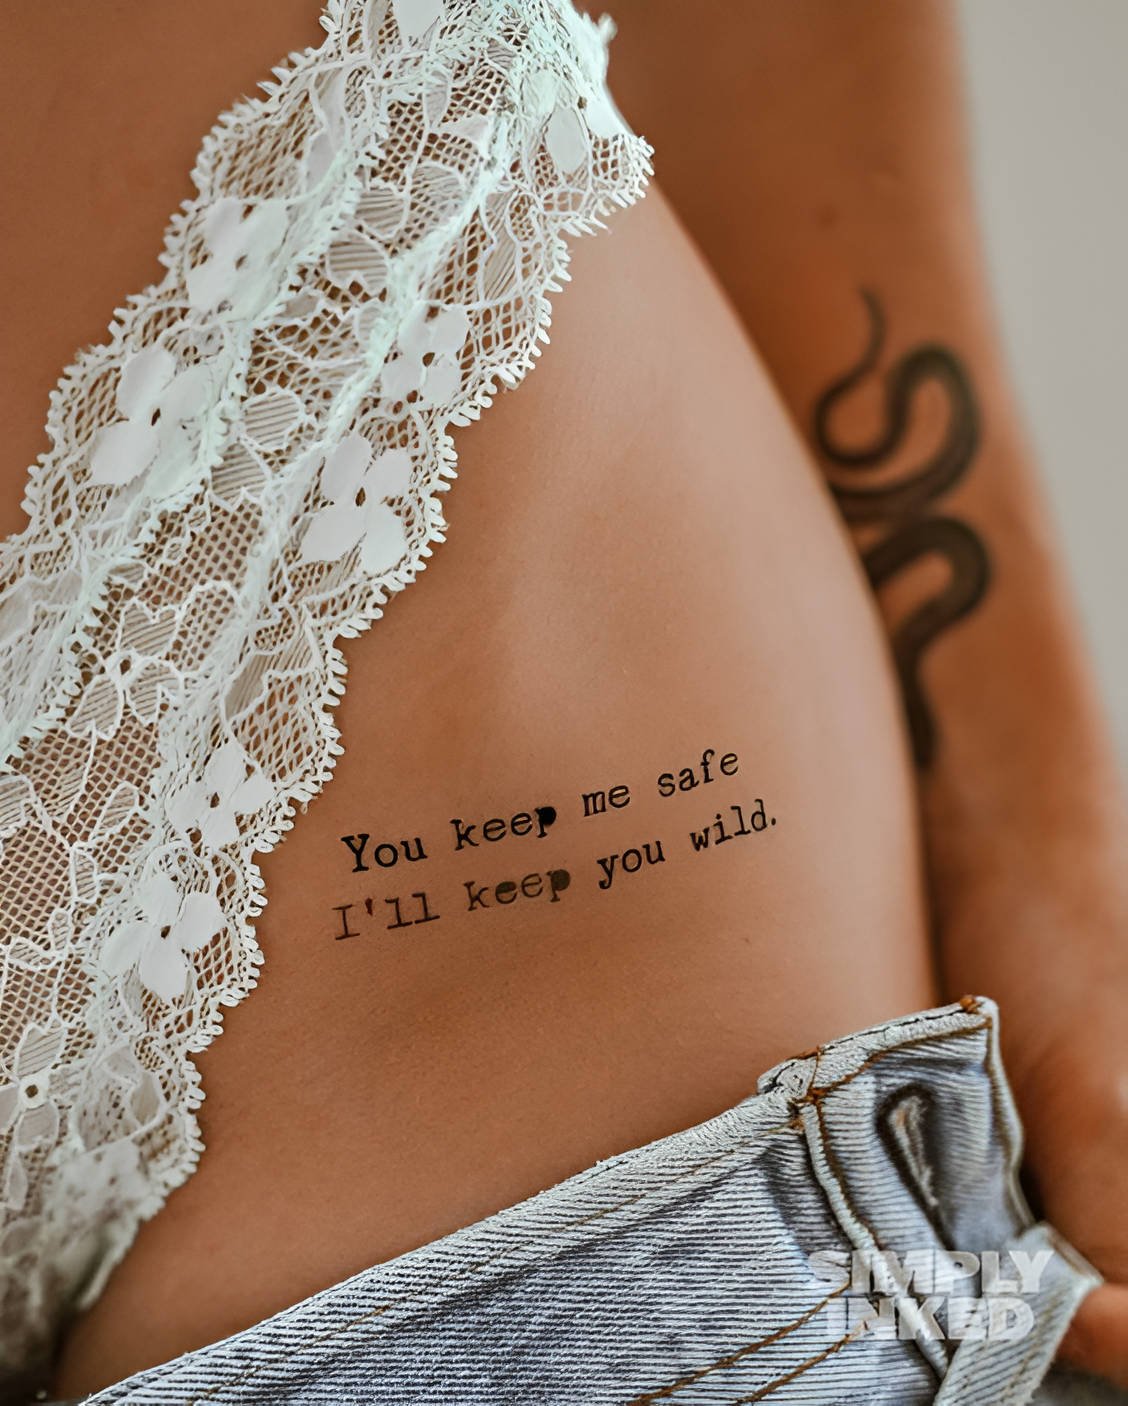 Hip Tattoo With Wild Quote